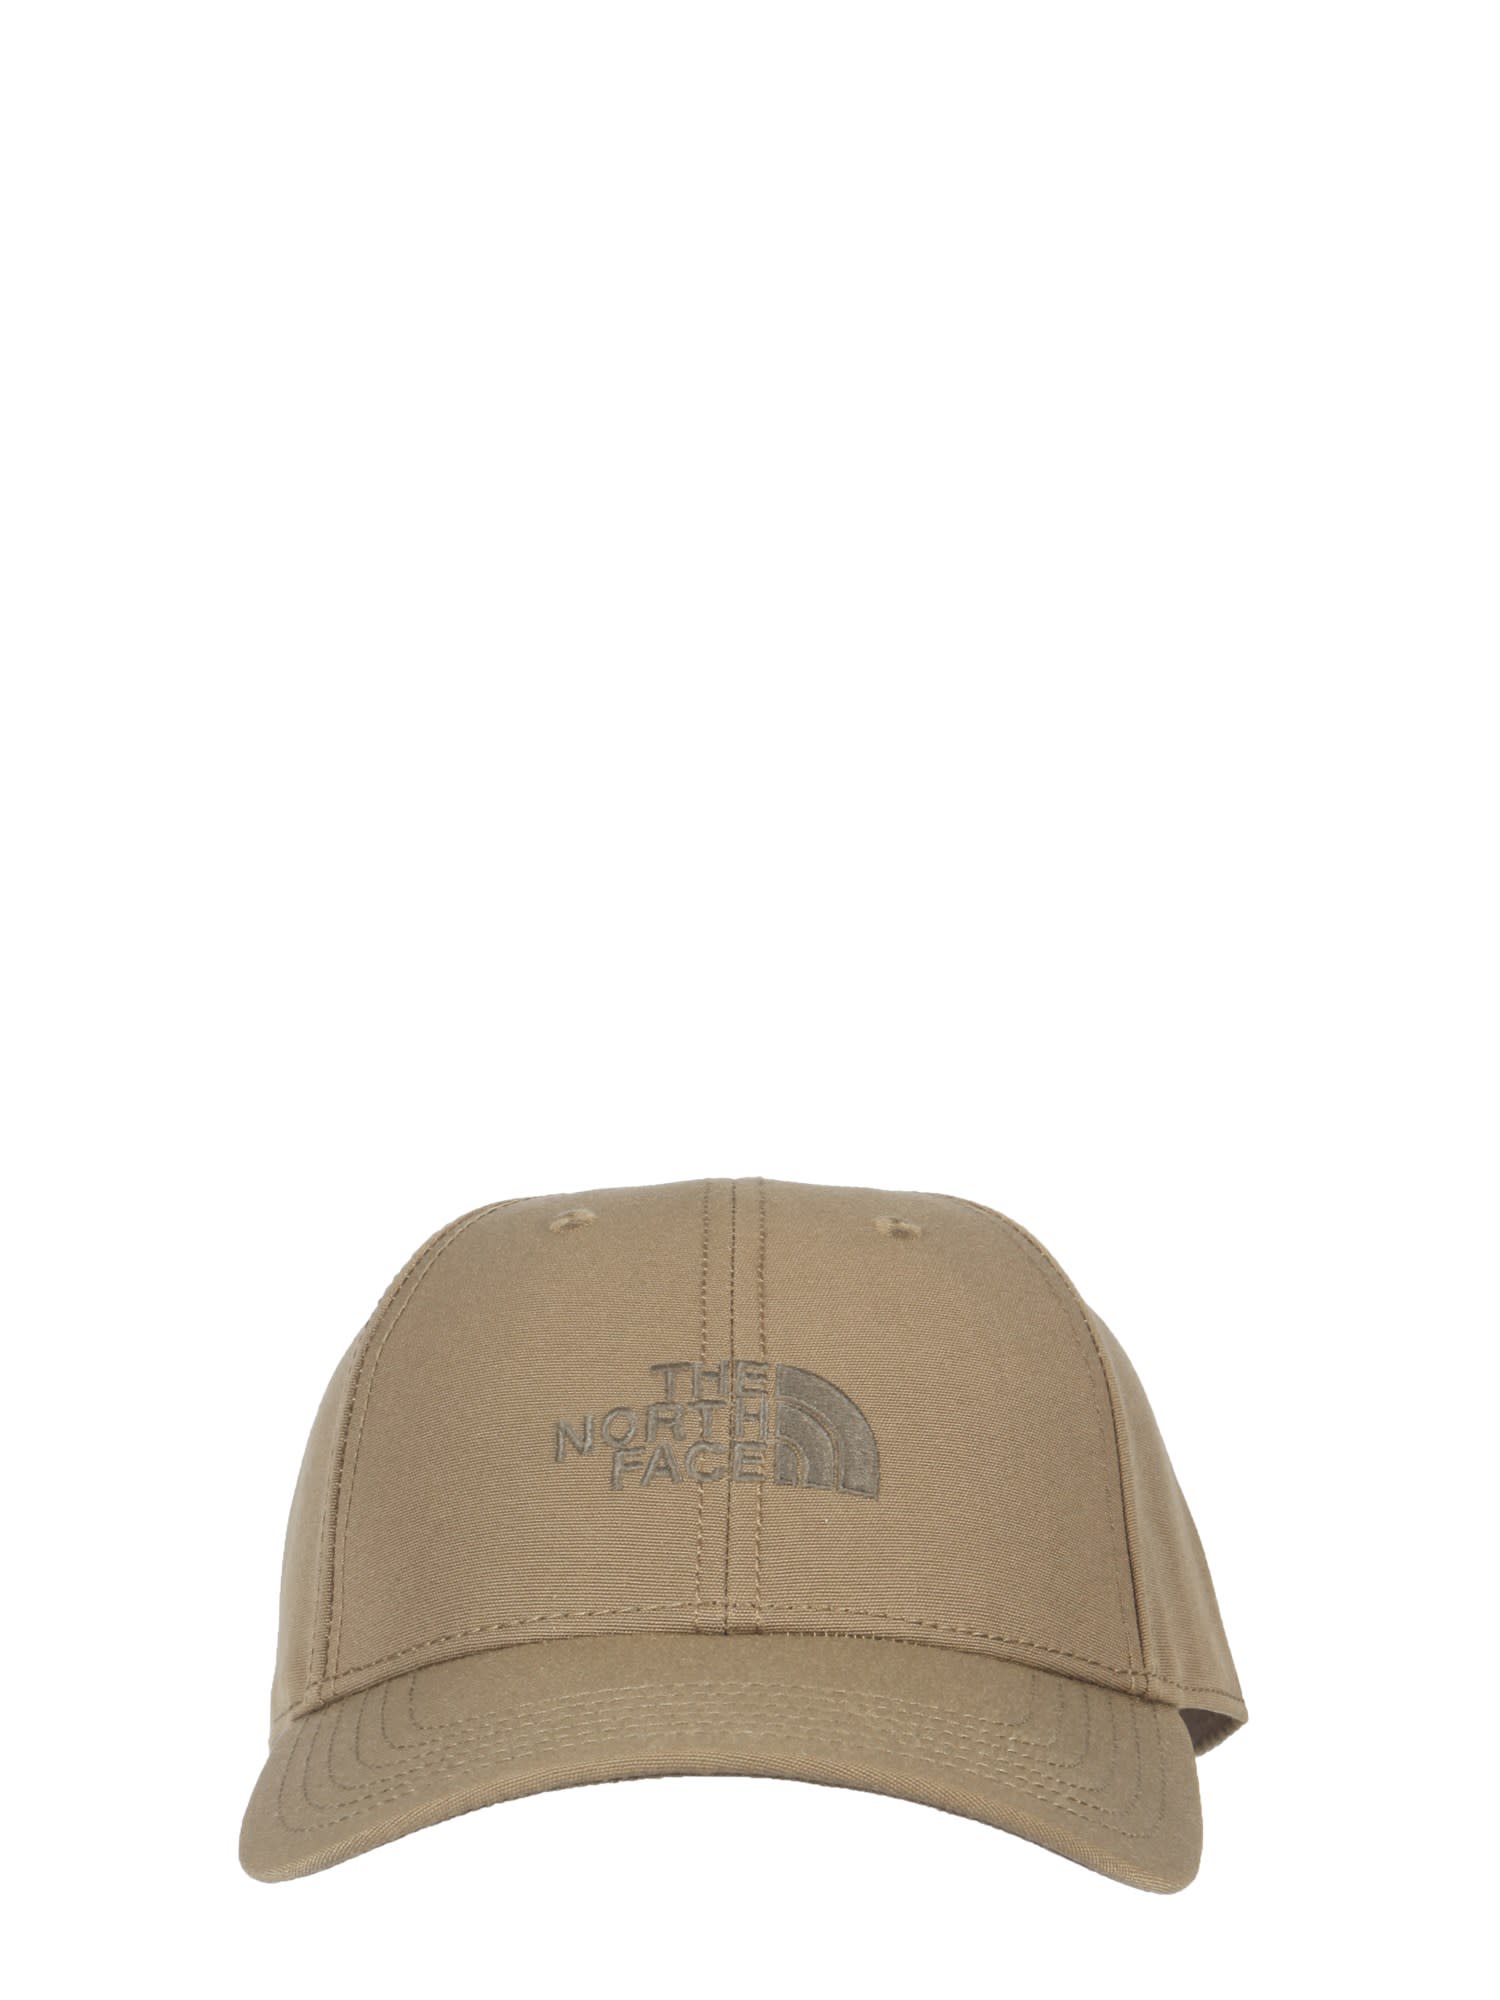 The North Face Logo Embroidery Baseball Hat